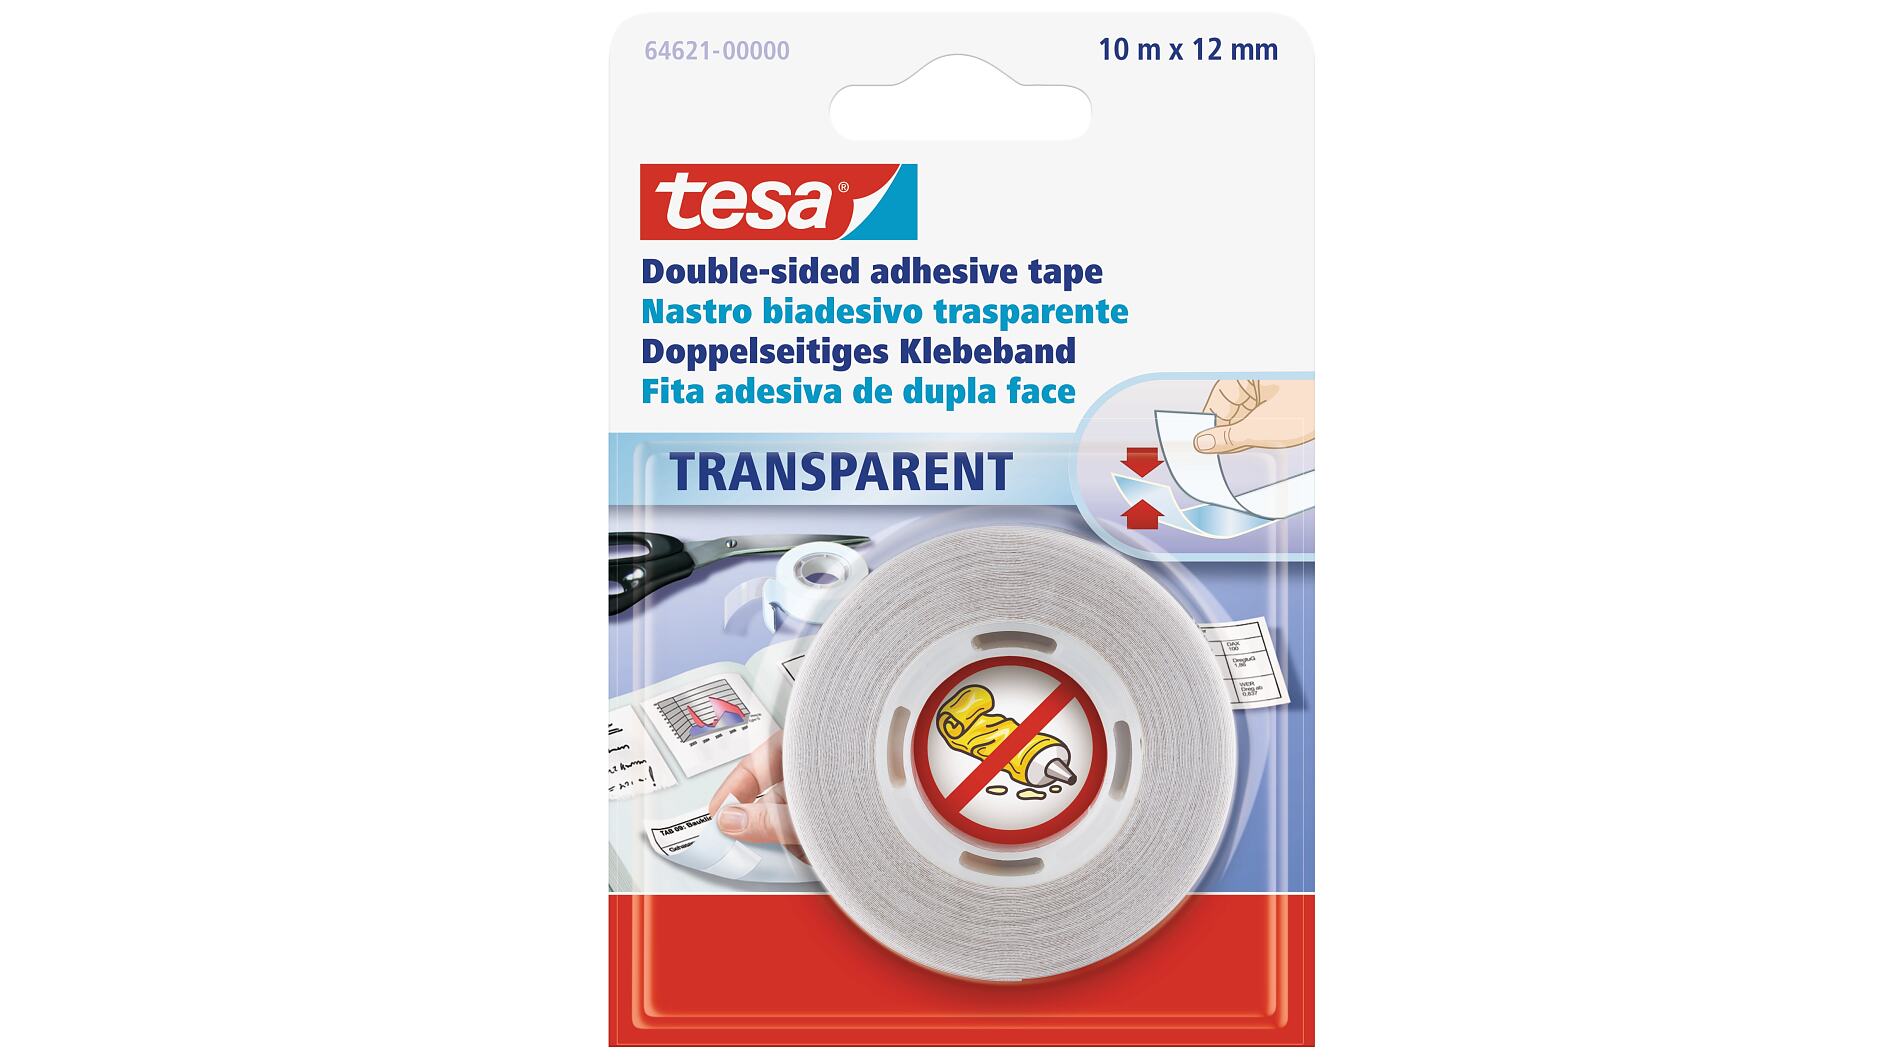 New Double Sided Adhesive Safe Body Anti-Slip Tape Clothing Clear